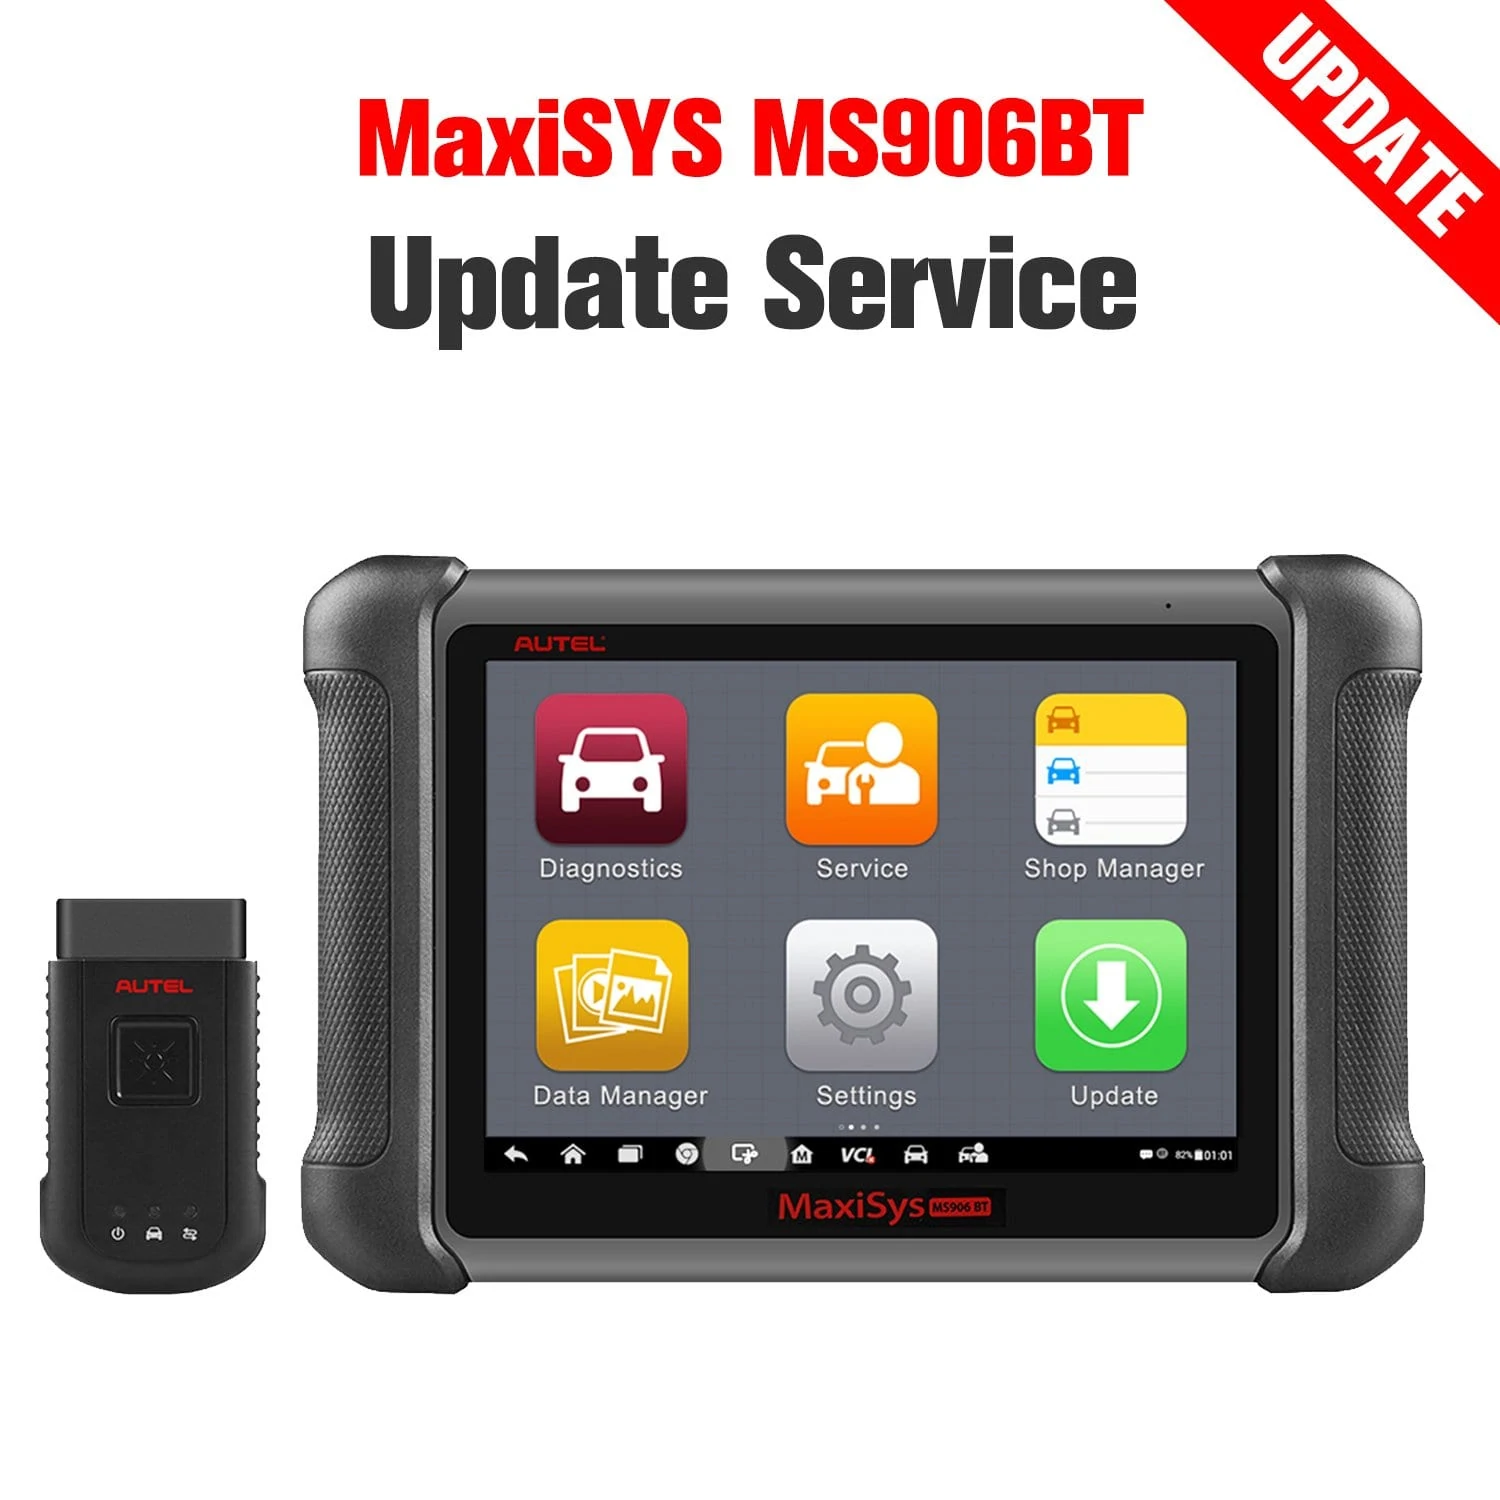 maxisys ms906bt update service